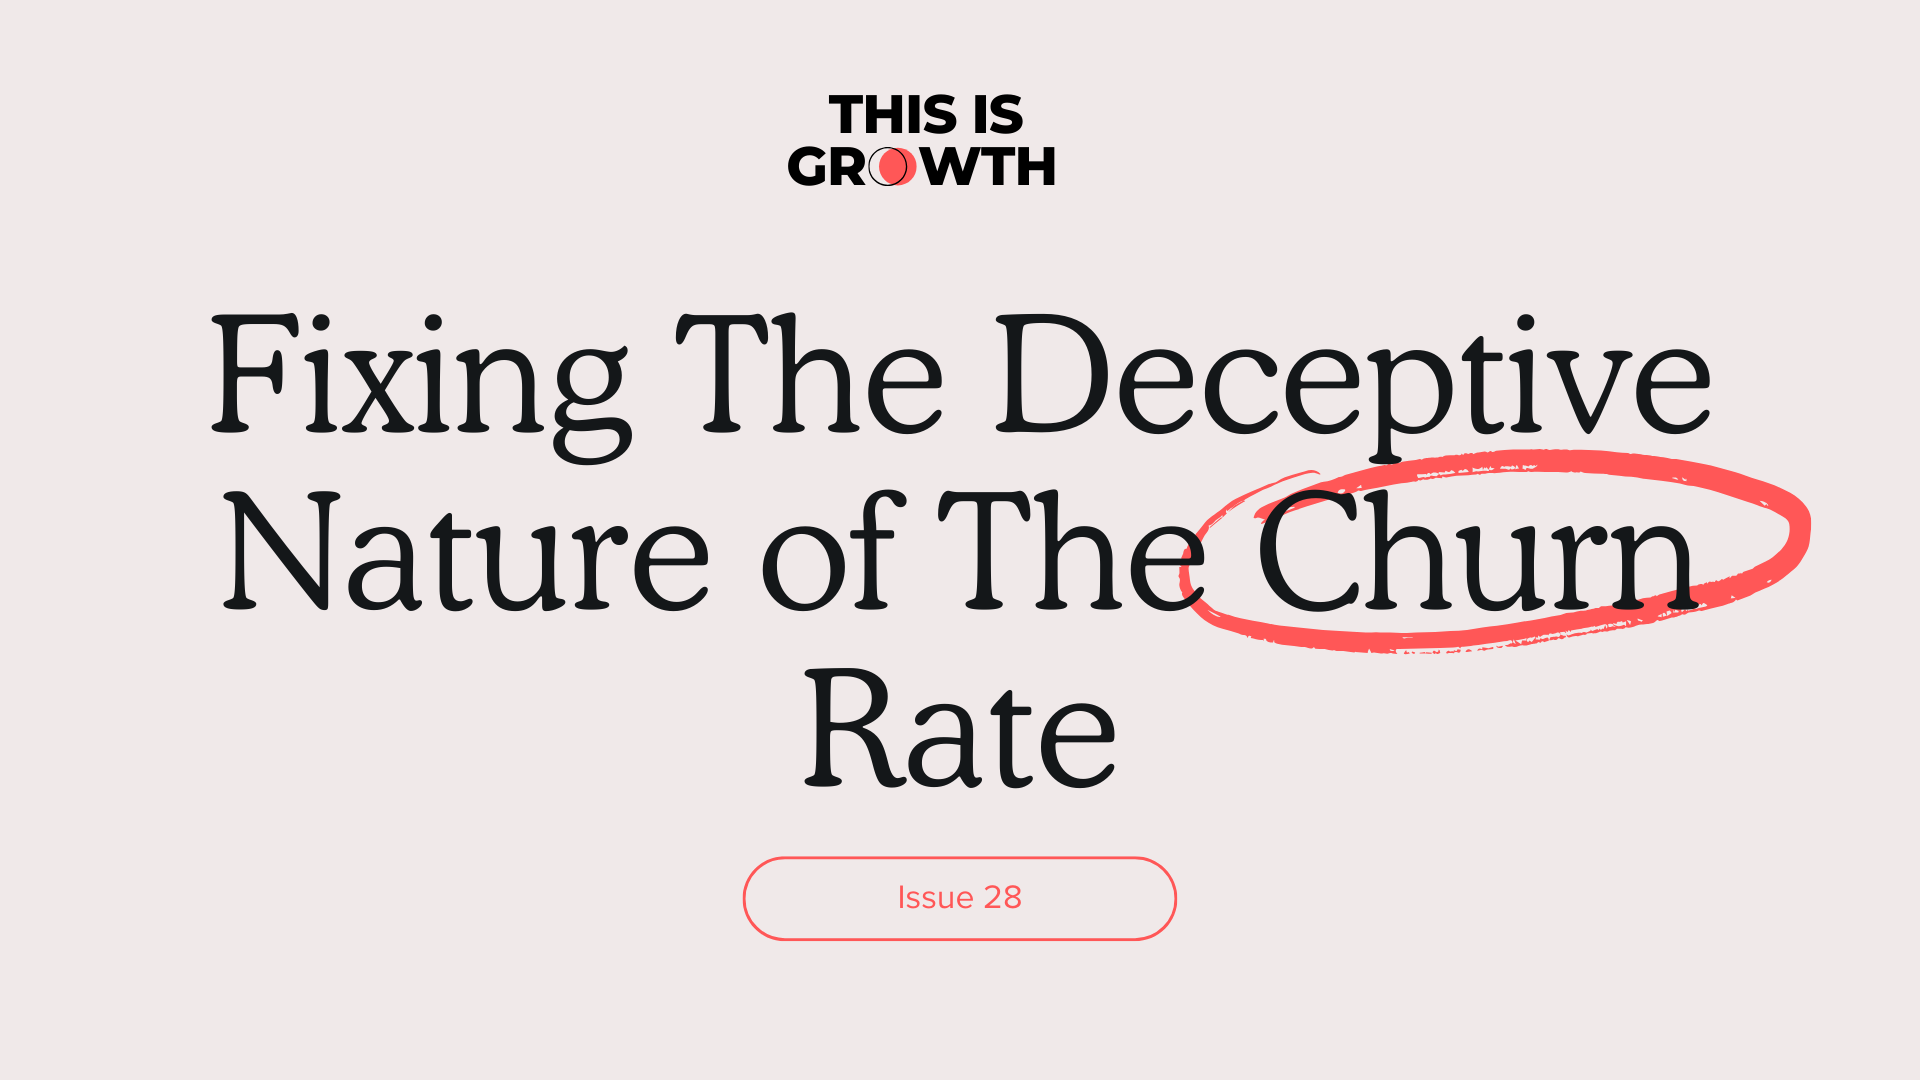 Fixing The Deceptive Nature of The Churn Rate